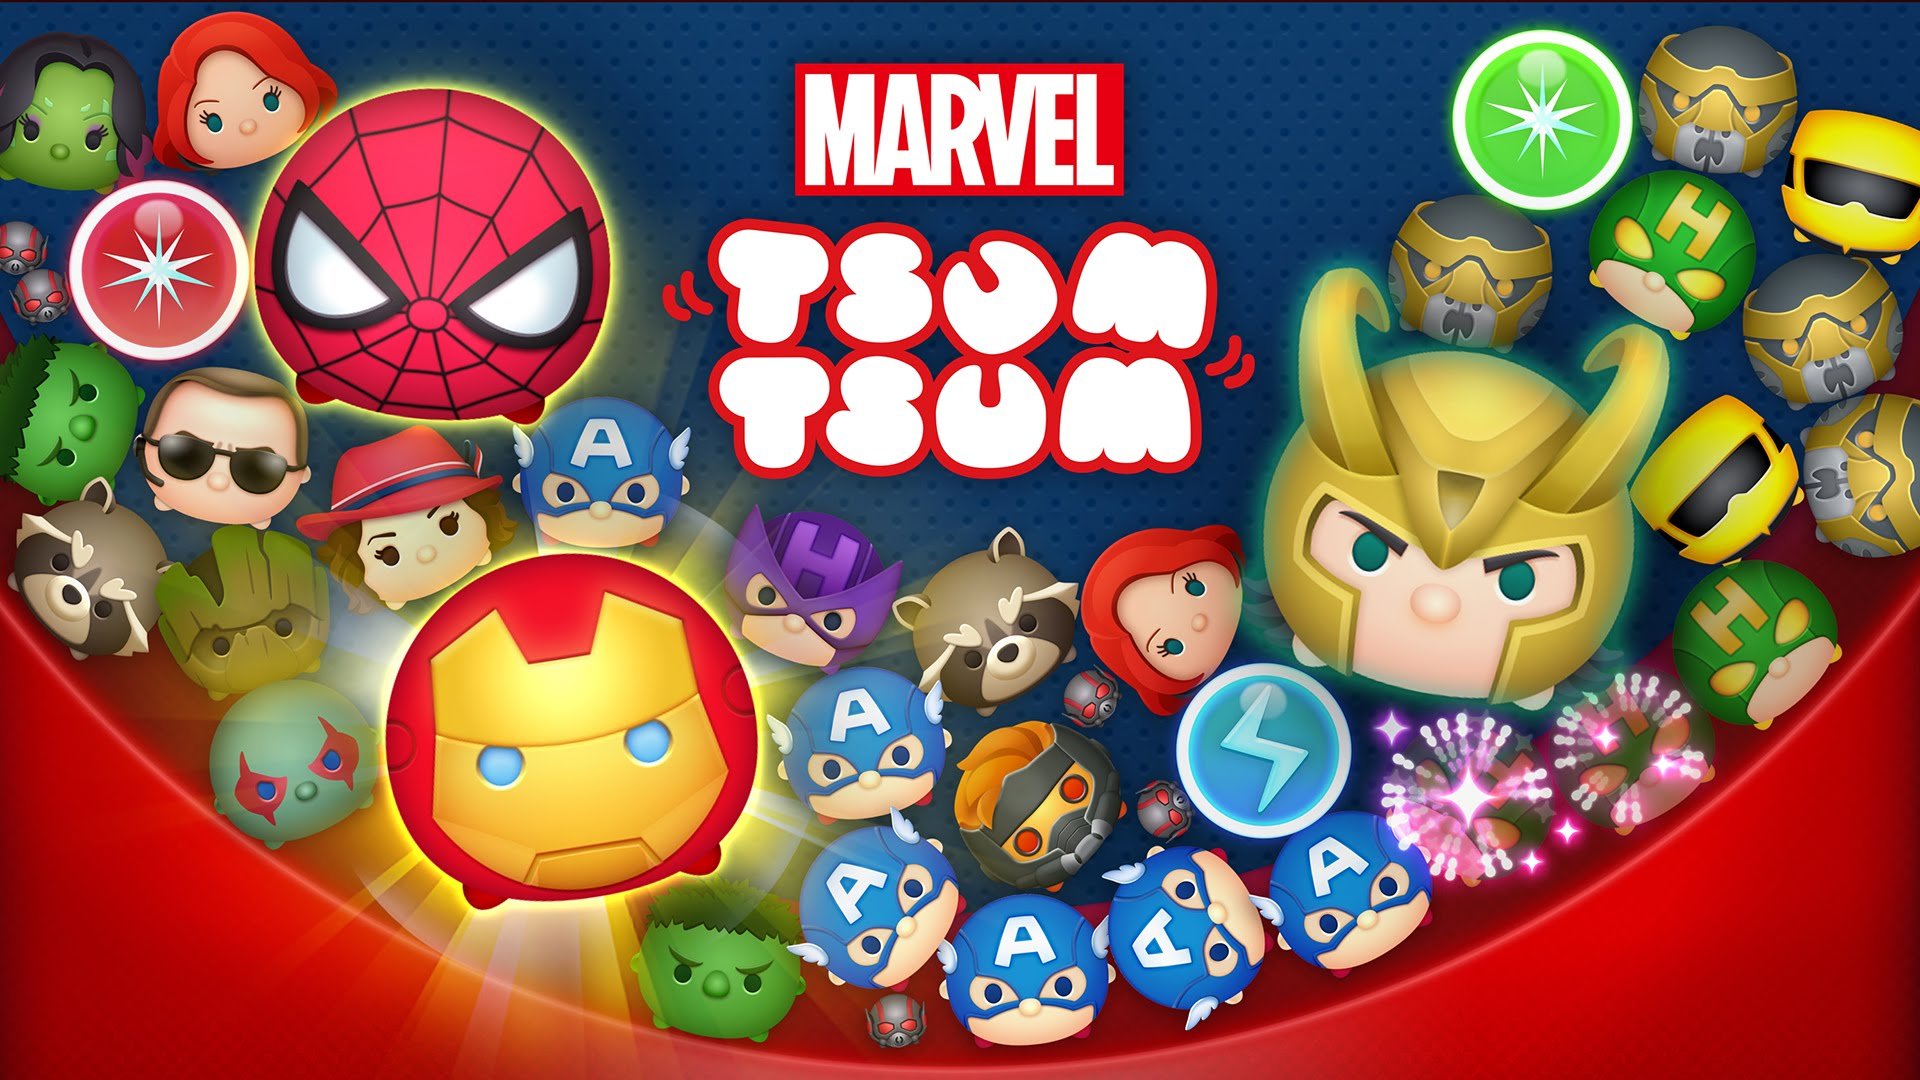 Marvel Tsum Tsum Character Guide: Who’s in the Game and How to Get Them All